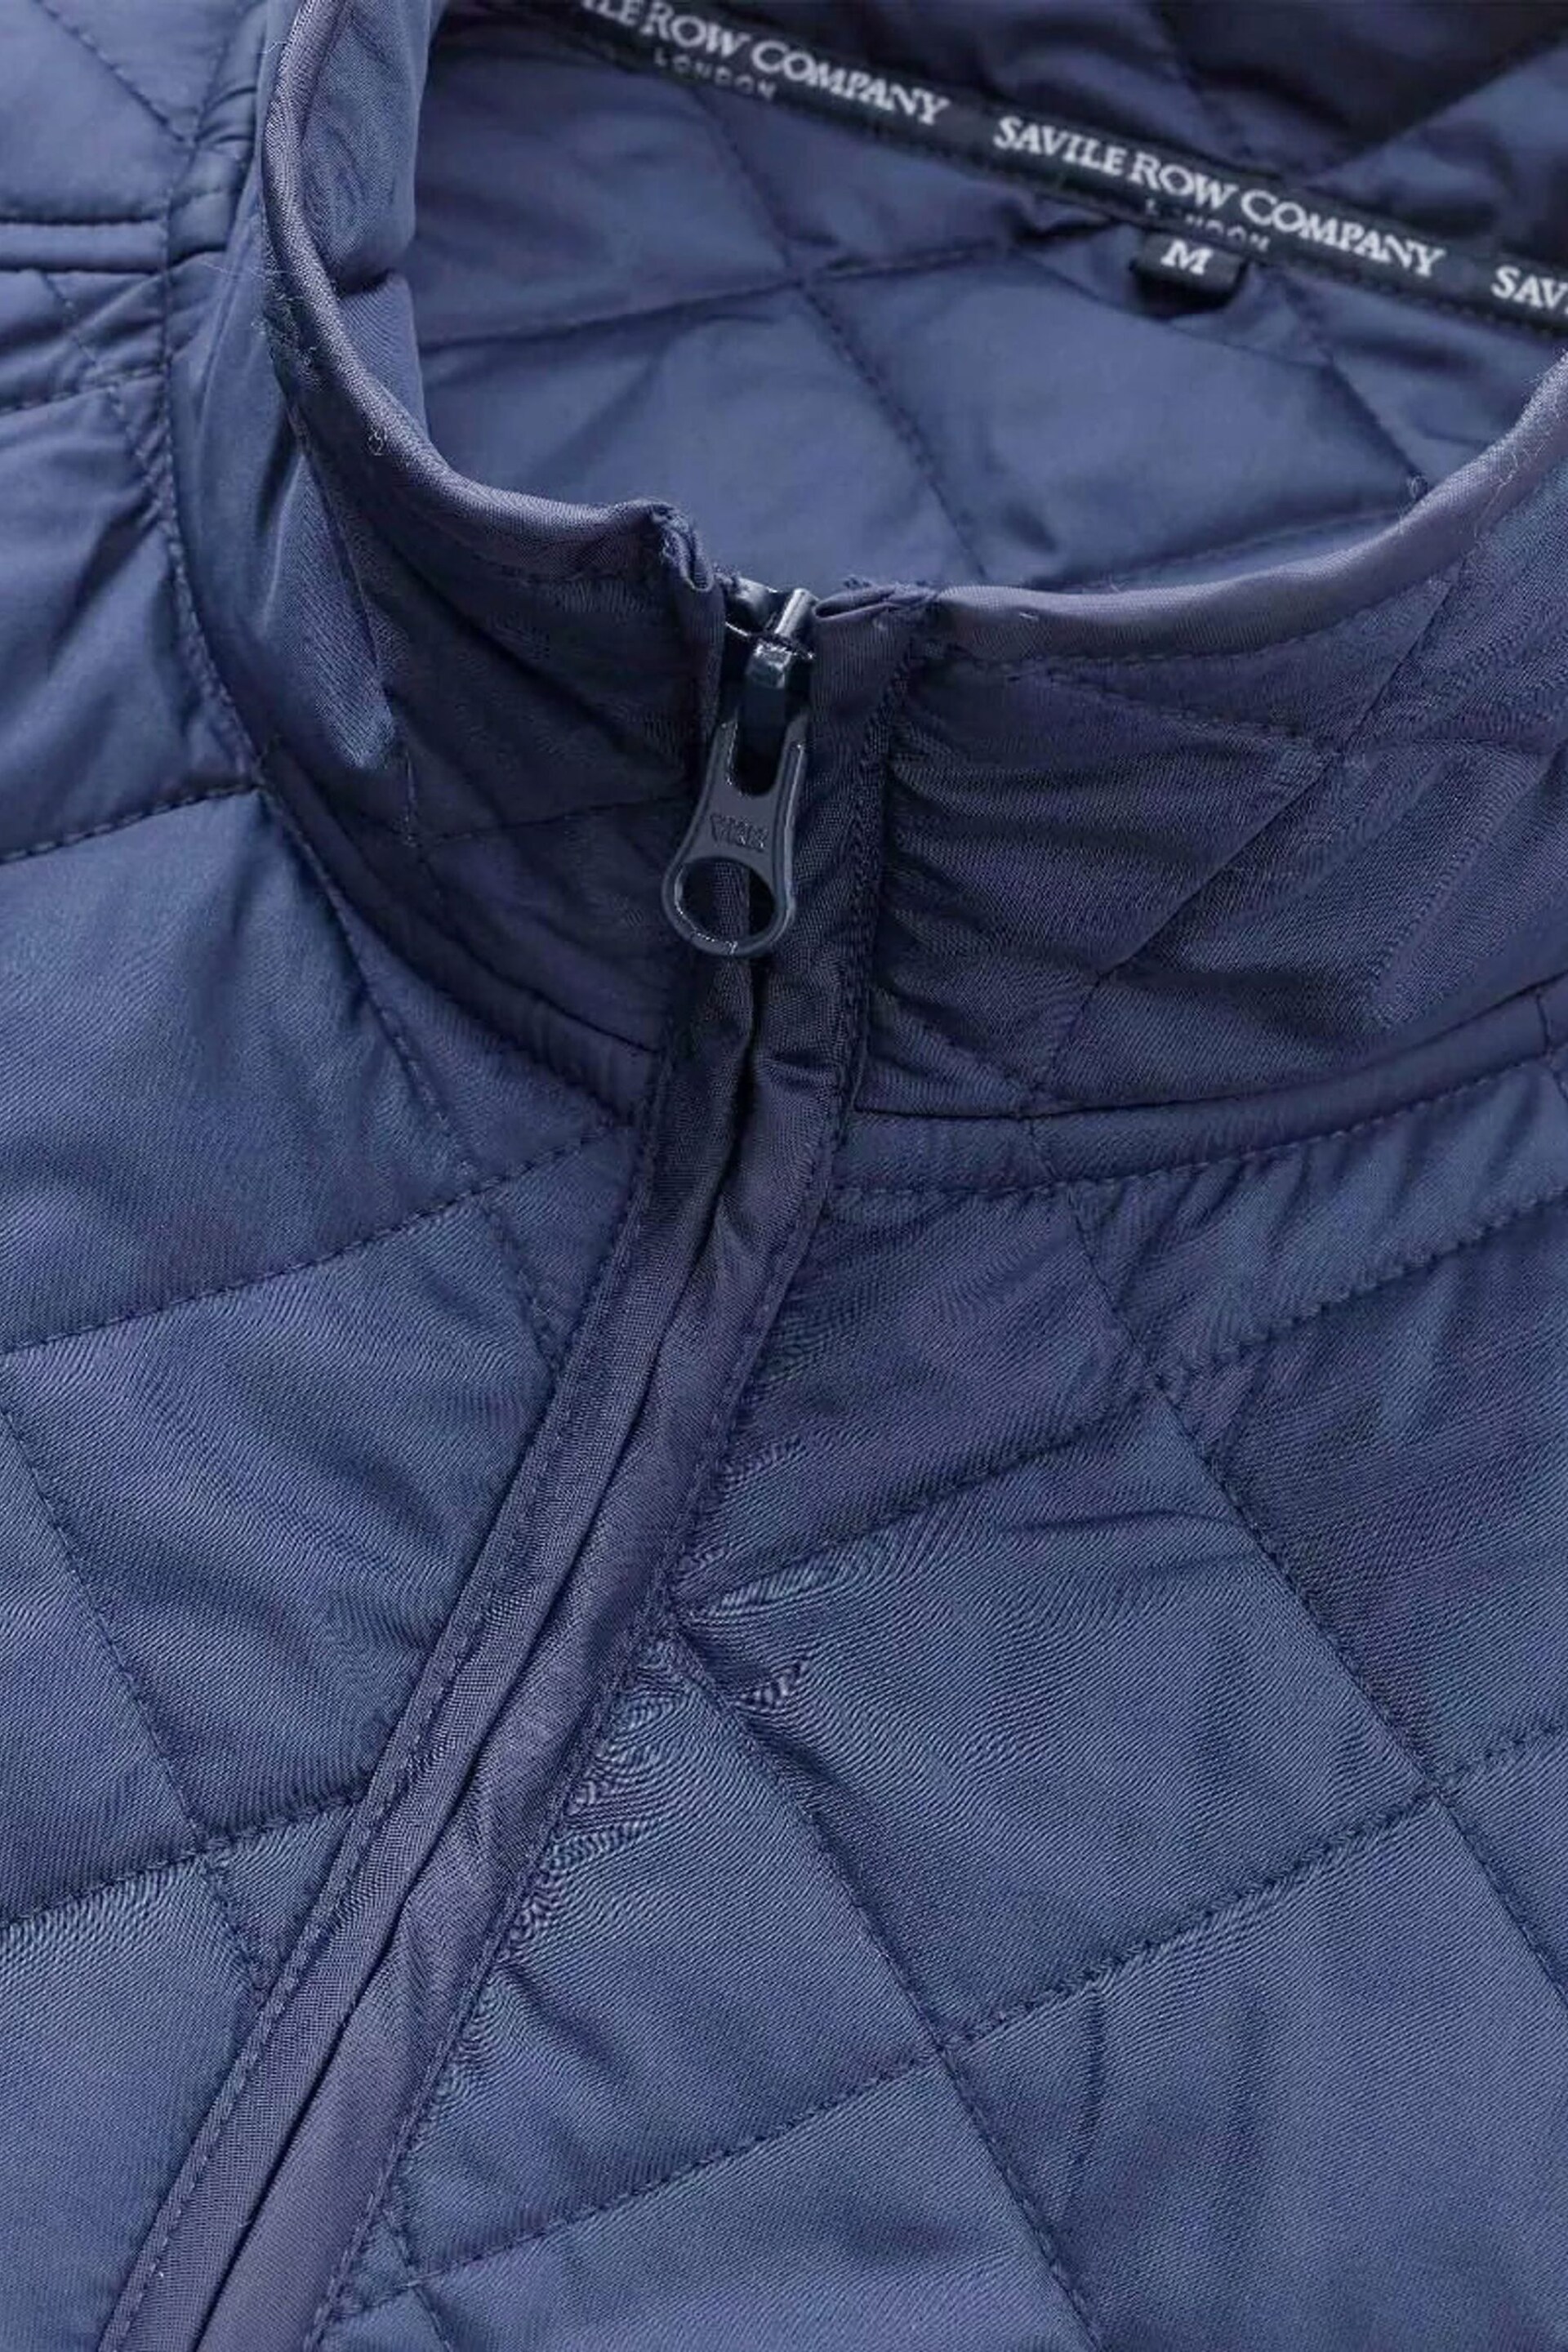 Savile Row Company Navy Blue Quilted Gilet - Image 4 of 5